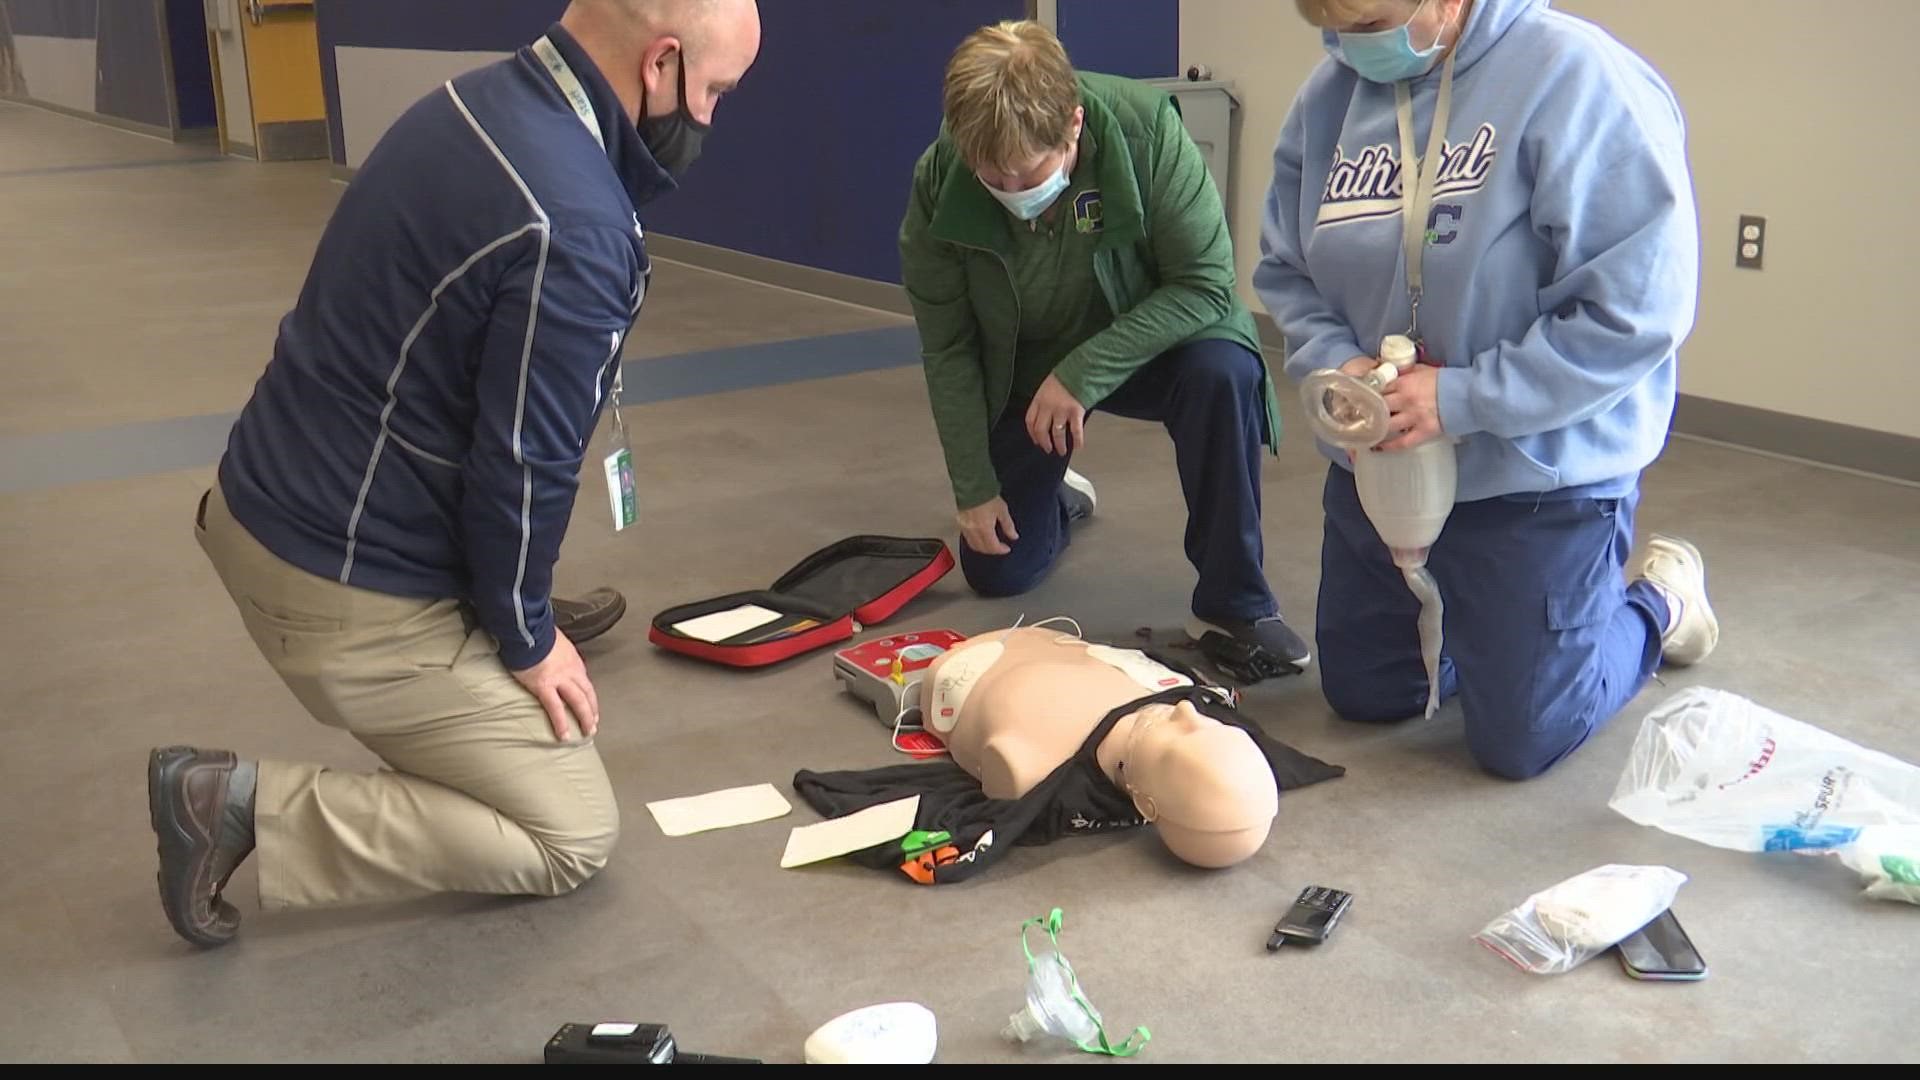 Rich Nye shows us how the staff at Cathedral High School.. is prepared to act fast.. with "life saving" equipment